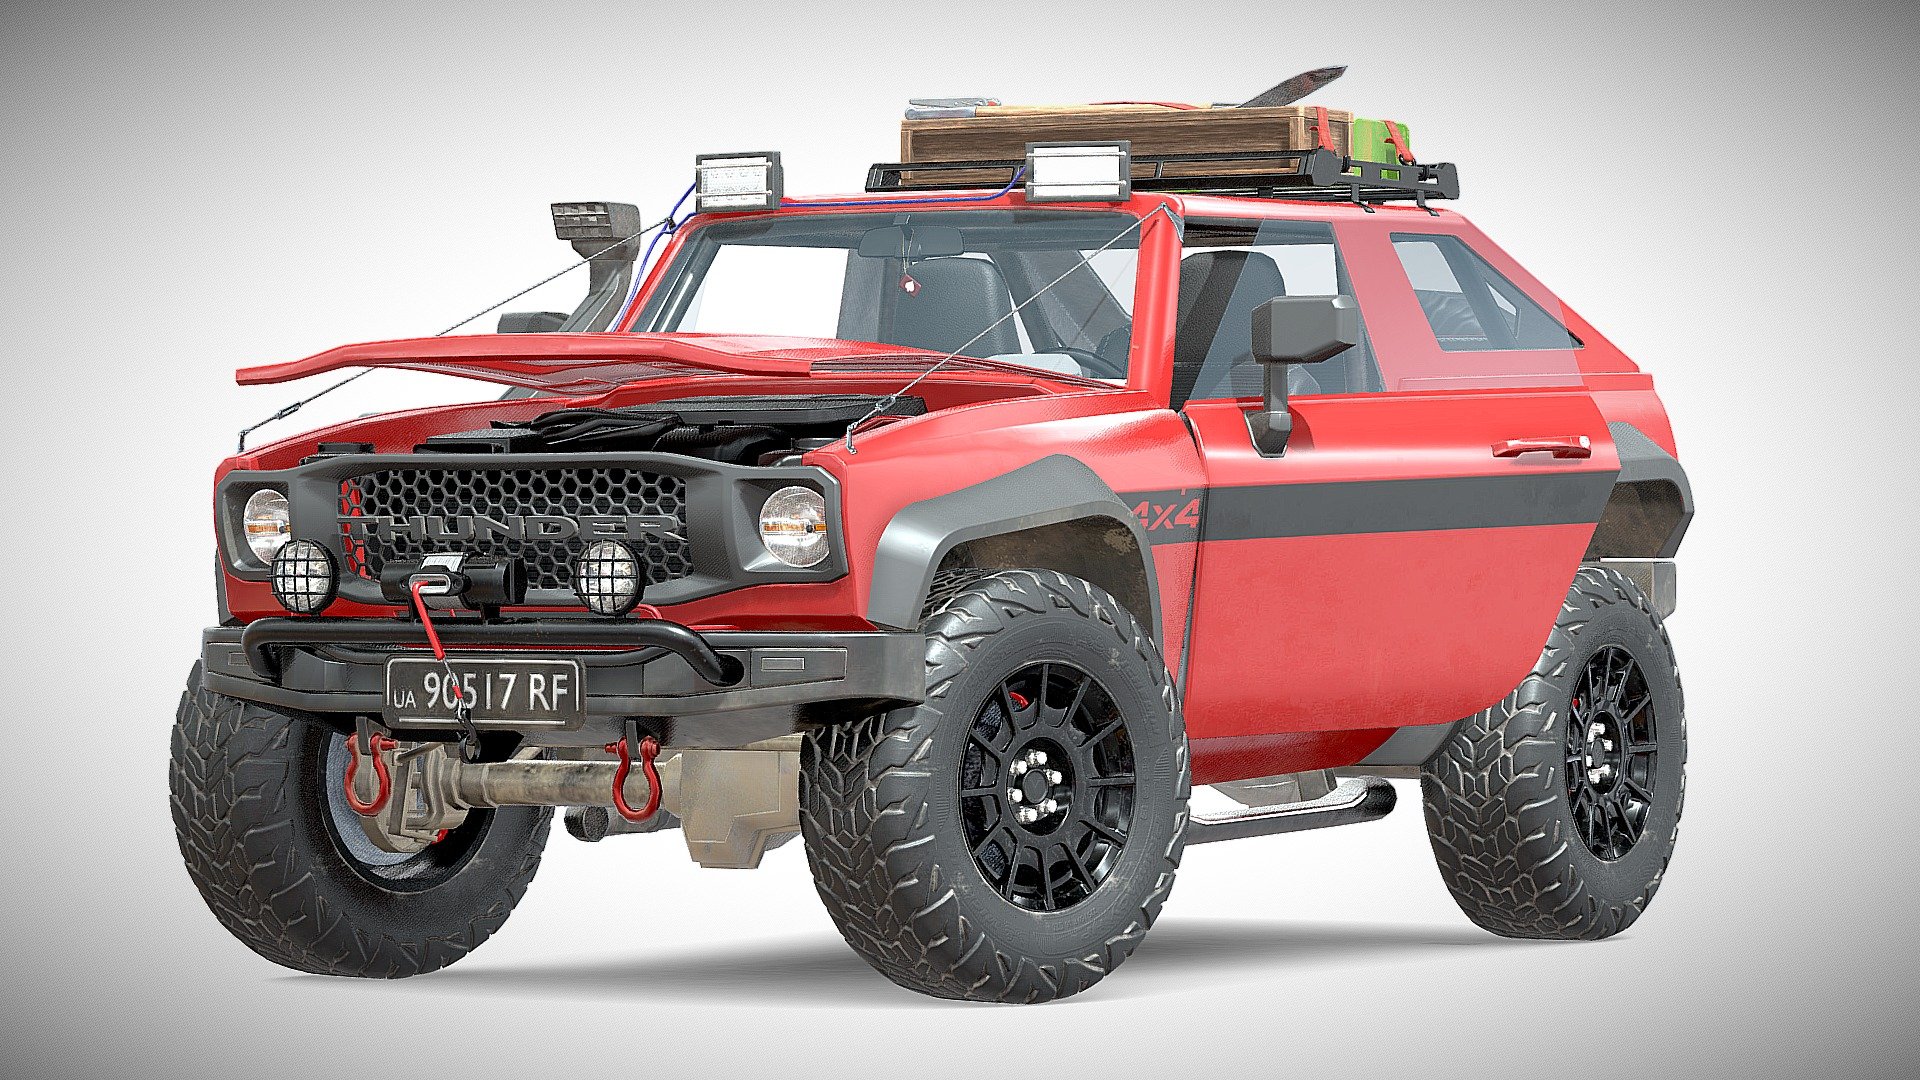 AAA Realistic and Game-ready model of a Generic Red SUV

This Suv is fully brandless and generic so it can be used in any project without any righ claim issues

It has PBR textures in JPG format with the following layouts:

Exterior(4096x4096)— Basecolor, Metallic, Roughness, Normals

Interior(2048x2048)— Basecolor, Metallic, Roughness, Normals, Emissive

Tire(2048x2048)— Basecolor, Metallic, Roughness, Normals

OffroadingKit(4096x2048)— Basecolor, Metallic, Roughness, Normals - Generic 4x4 SUV Red - Buy Royalty Free 3D model by rfarencibia 3d model